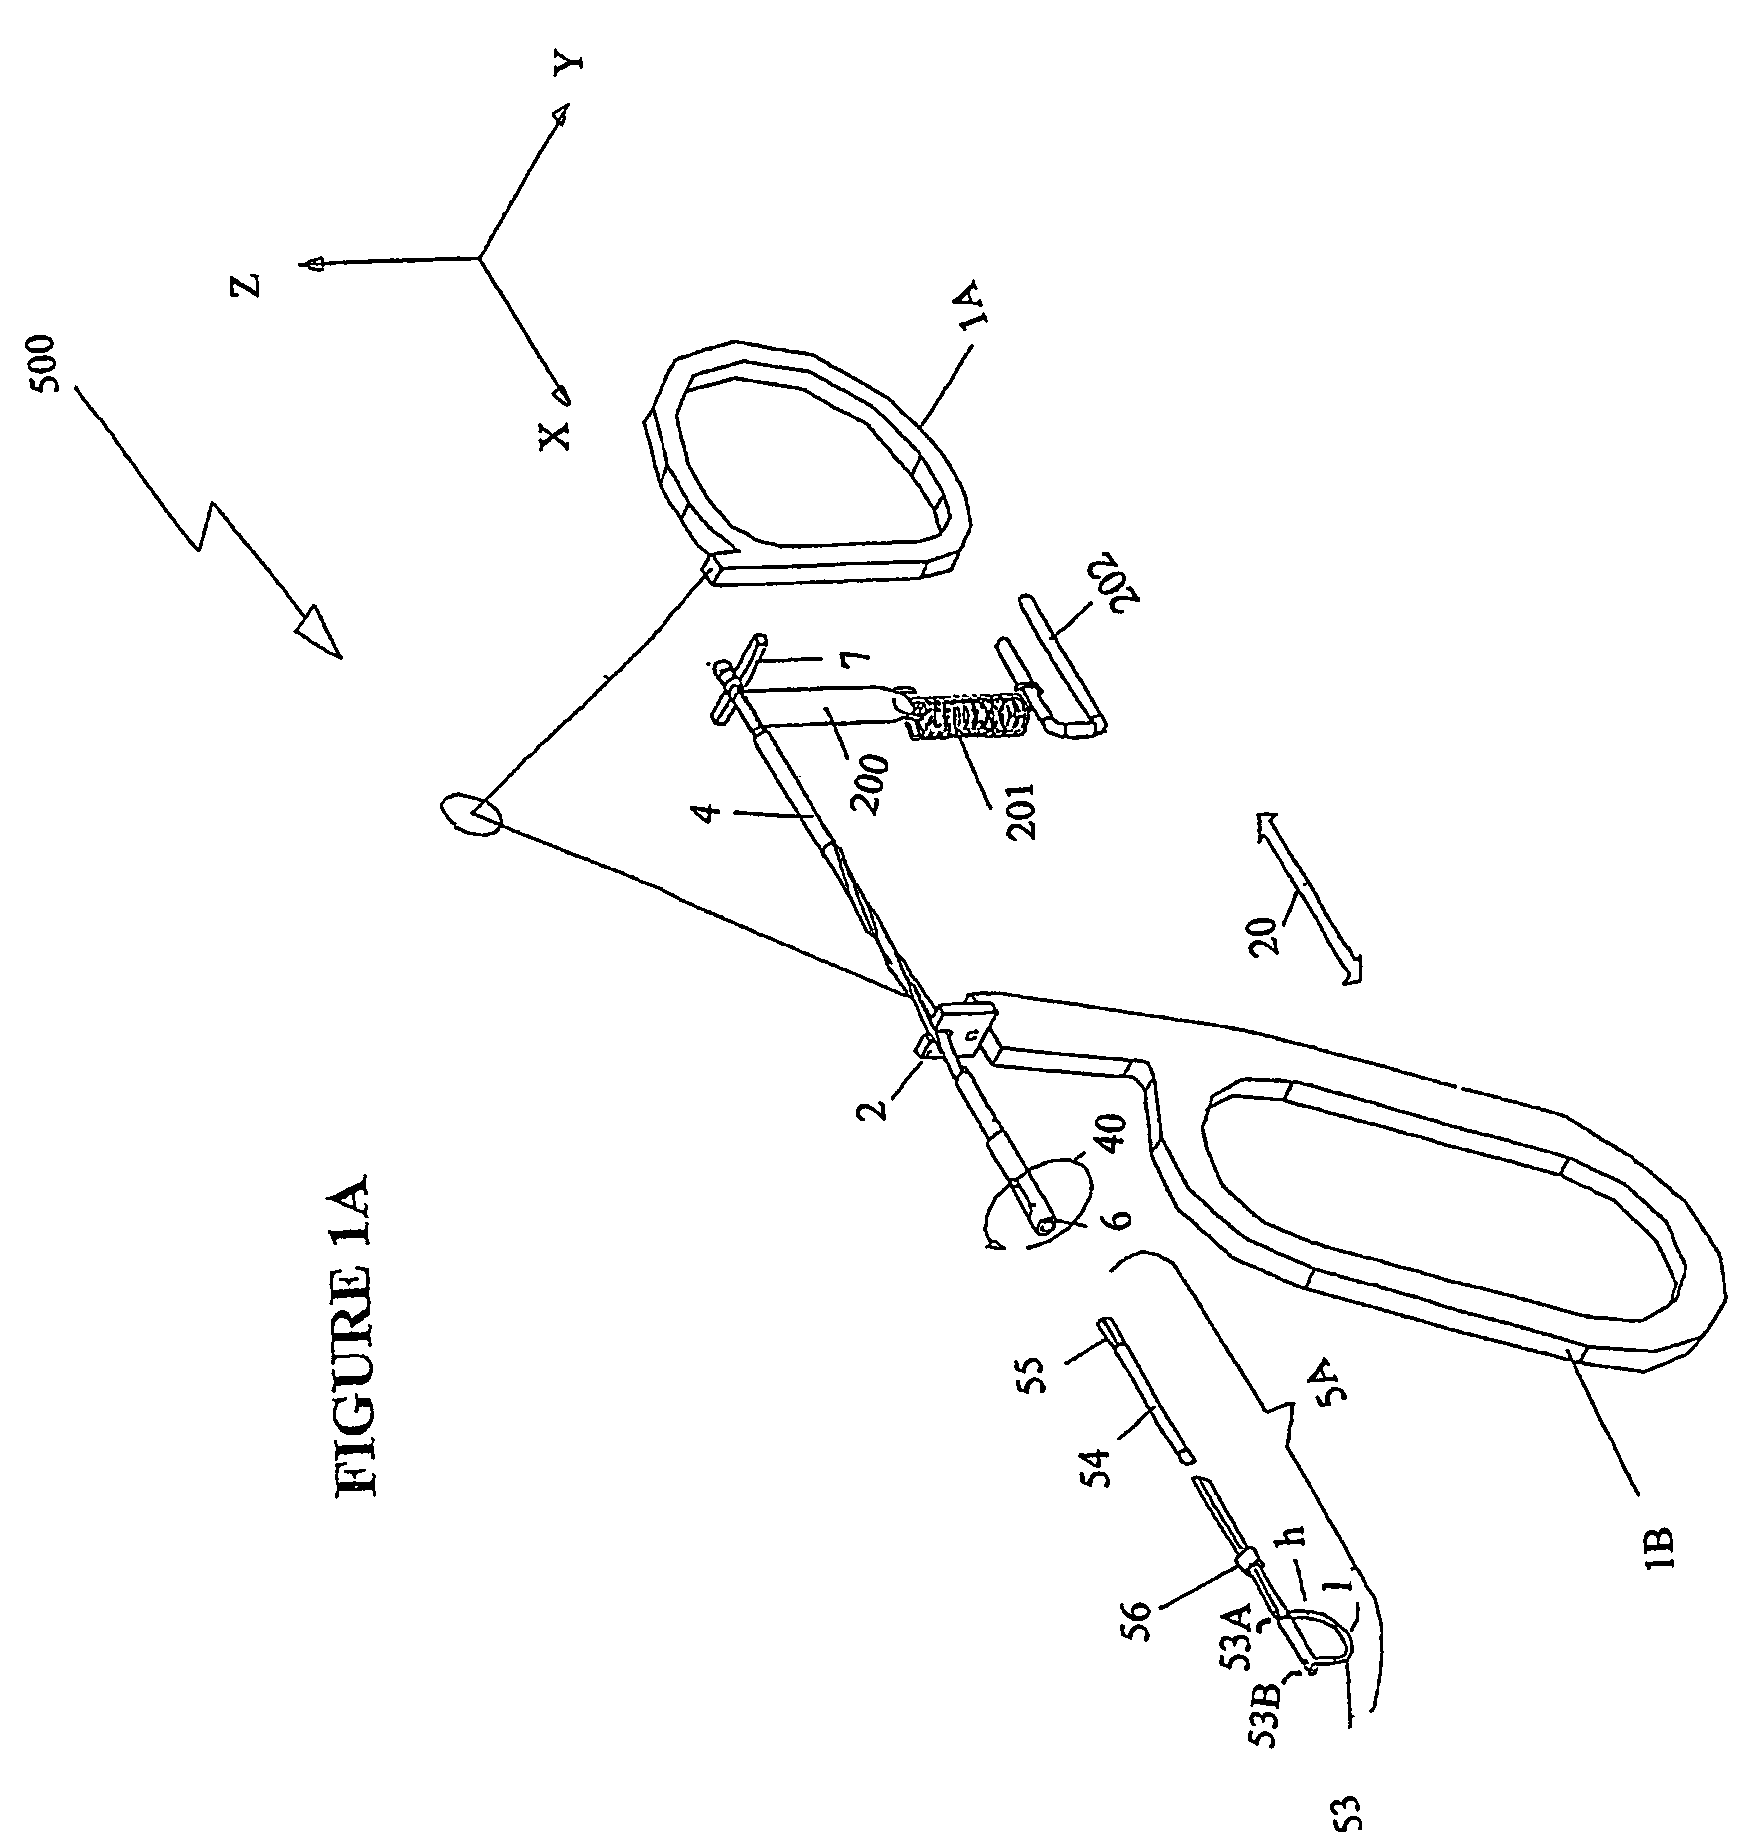 Working tool for accurate lateral resection of biological tissue and a method for use thereof